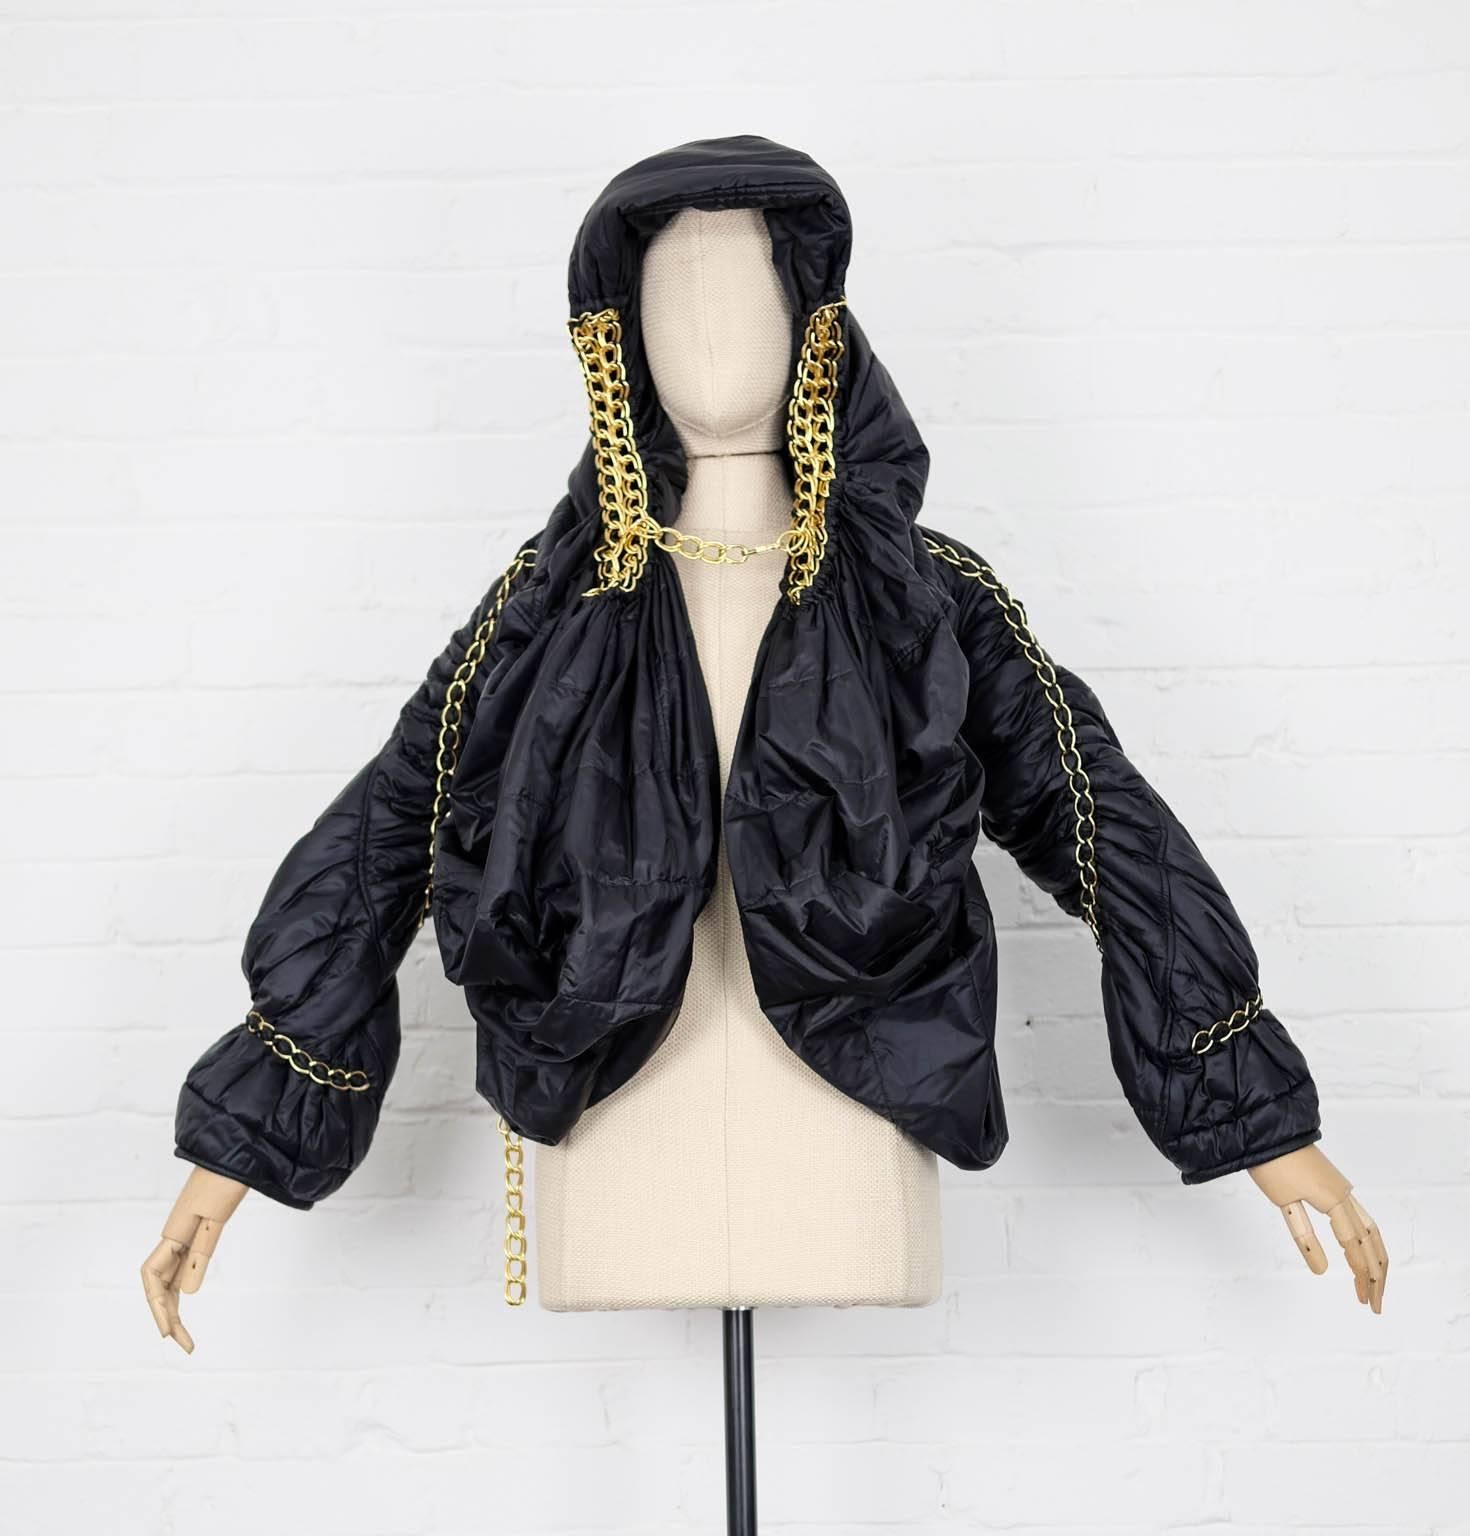 2009 JUNYA WATANABE-COMME DES GARÇONS  runway draped chain coat In Excellent Condition For Sale In London, GB